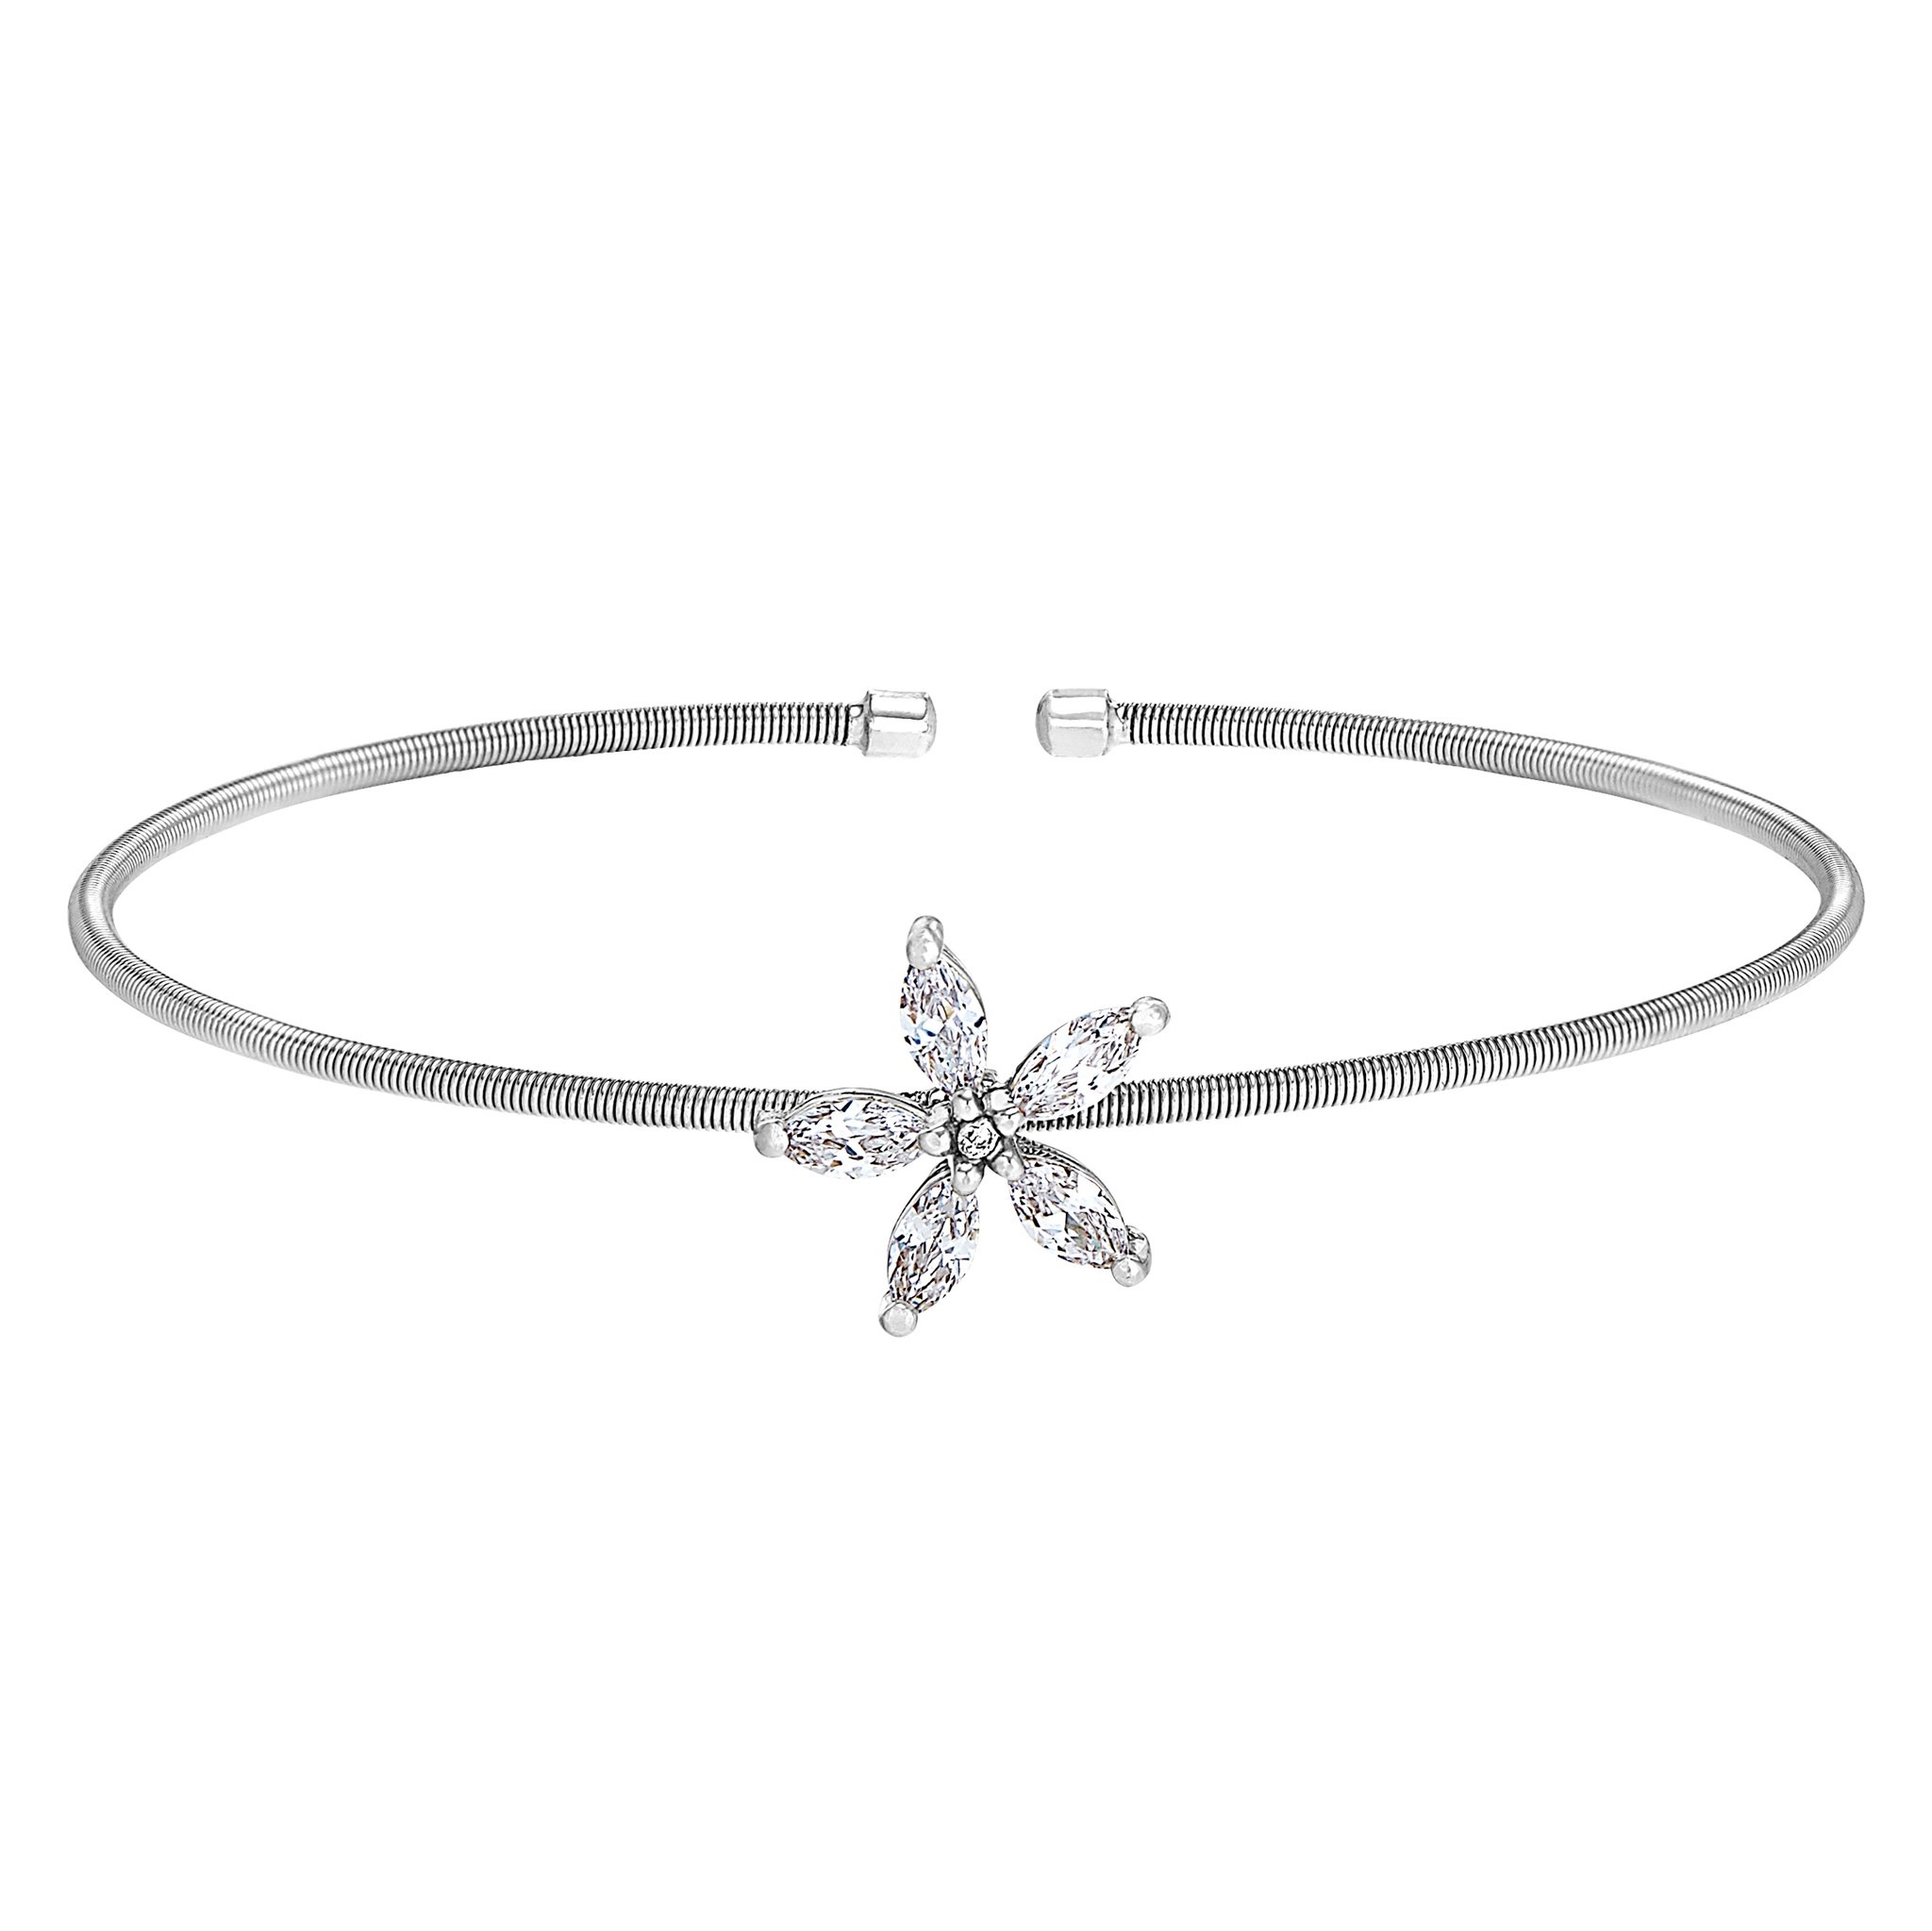 Rhodium Finish Sterling Silver Cable Cuff Flower Bracelet with Simulated Diamonds